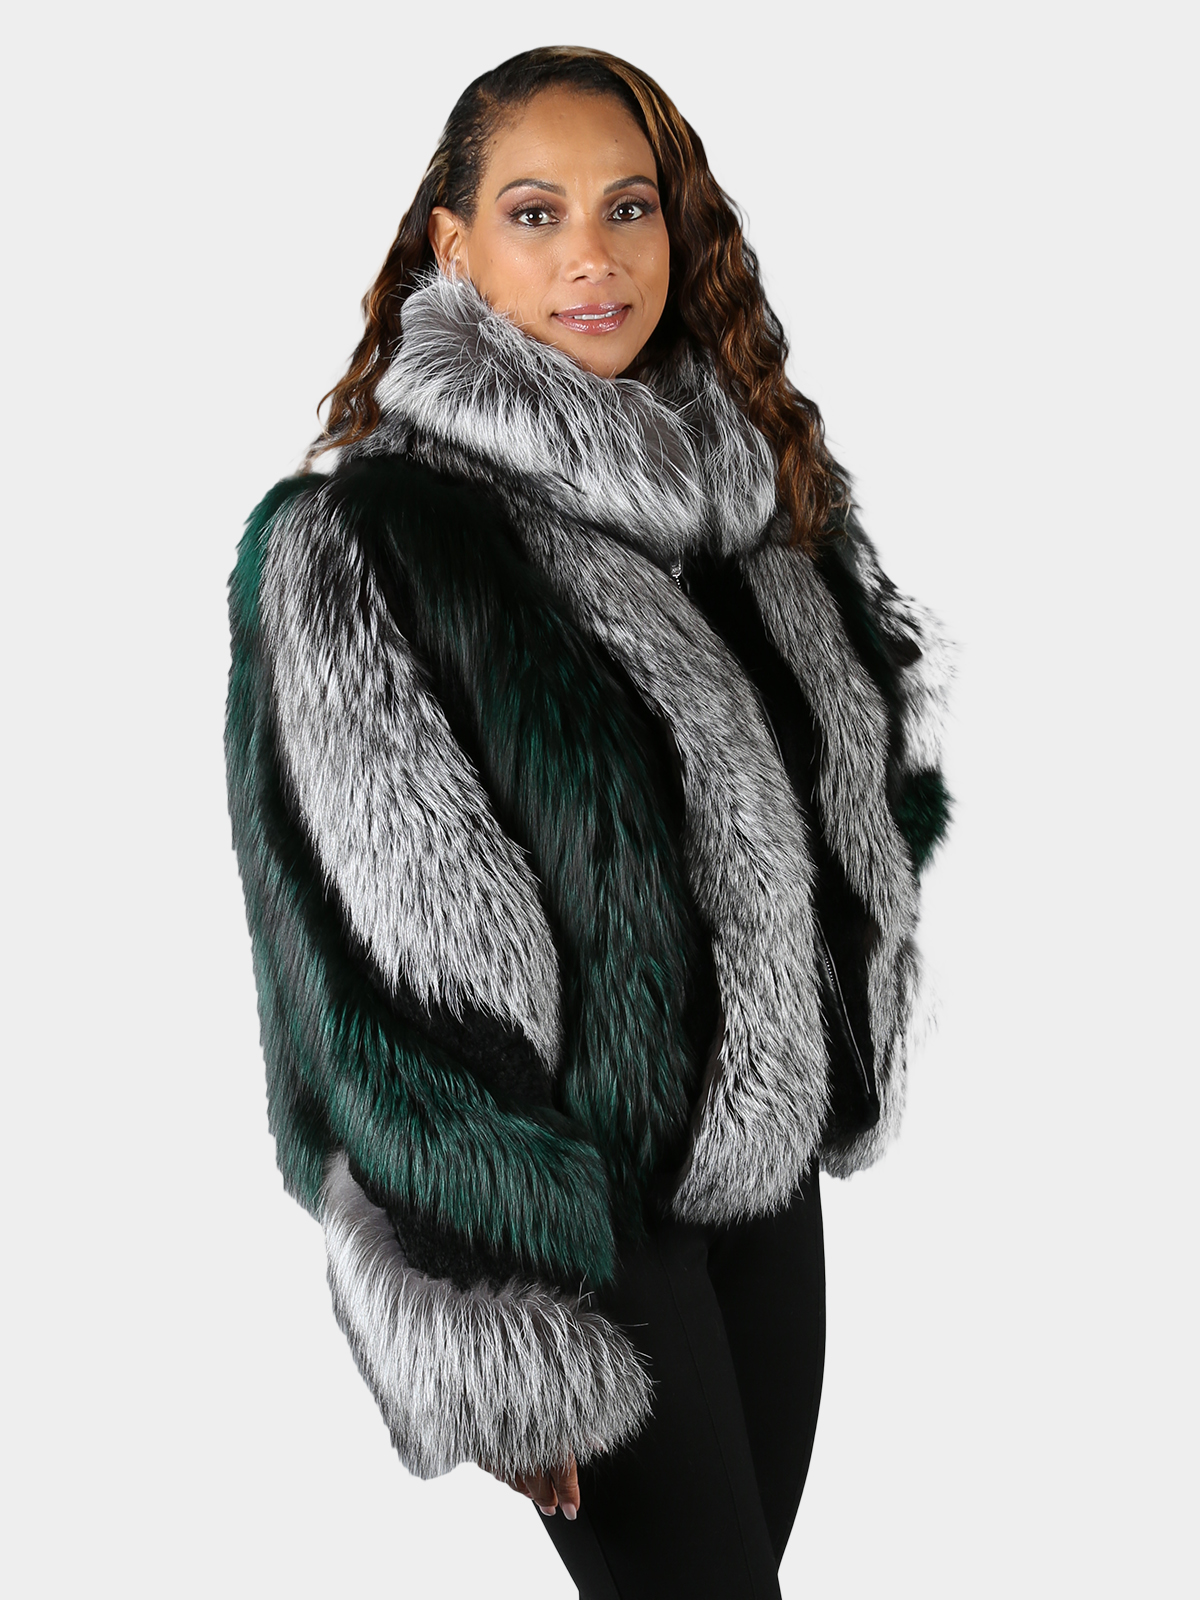 Woman's Natural Silver Fox and Green Dyed Fox Fur Jacket - Day Furs